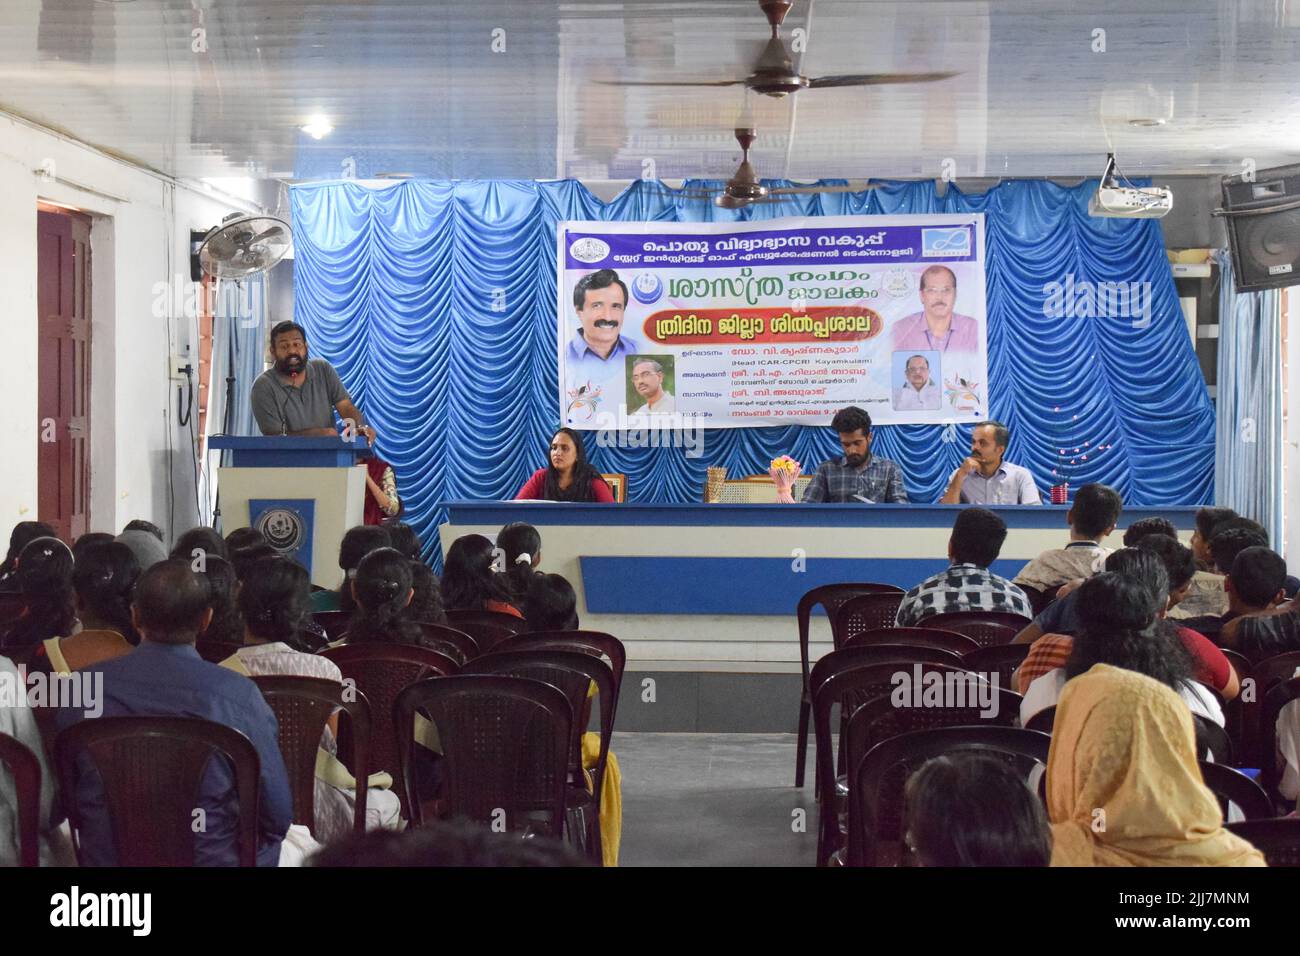 A teacher is speaking in the inauguration of a function in school. Stock Photo